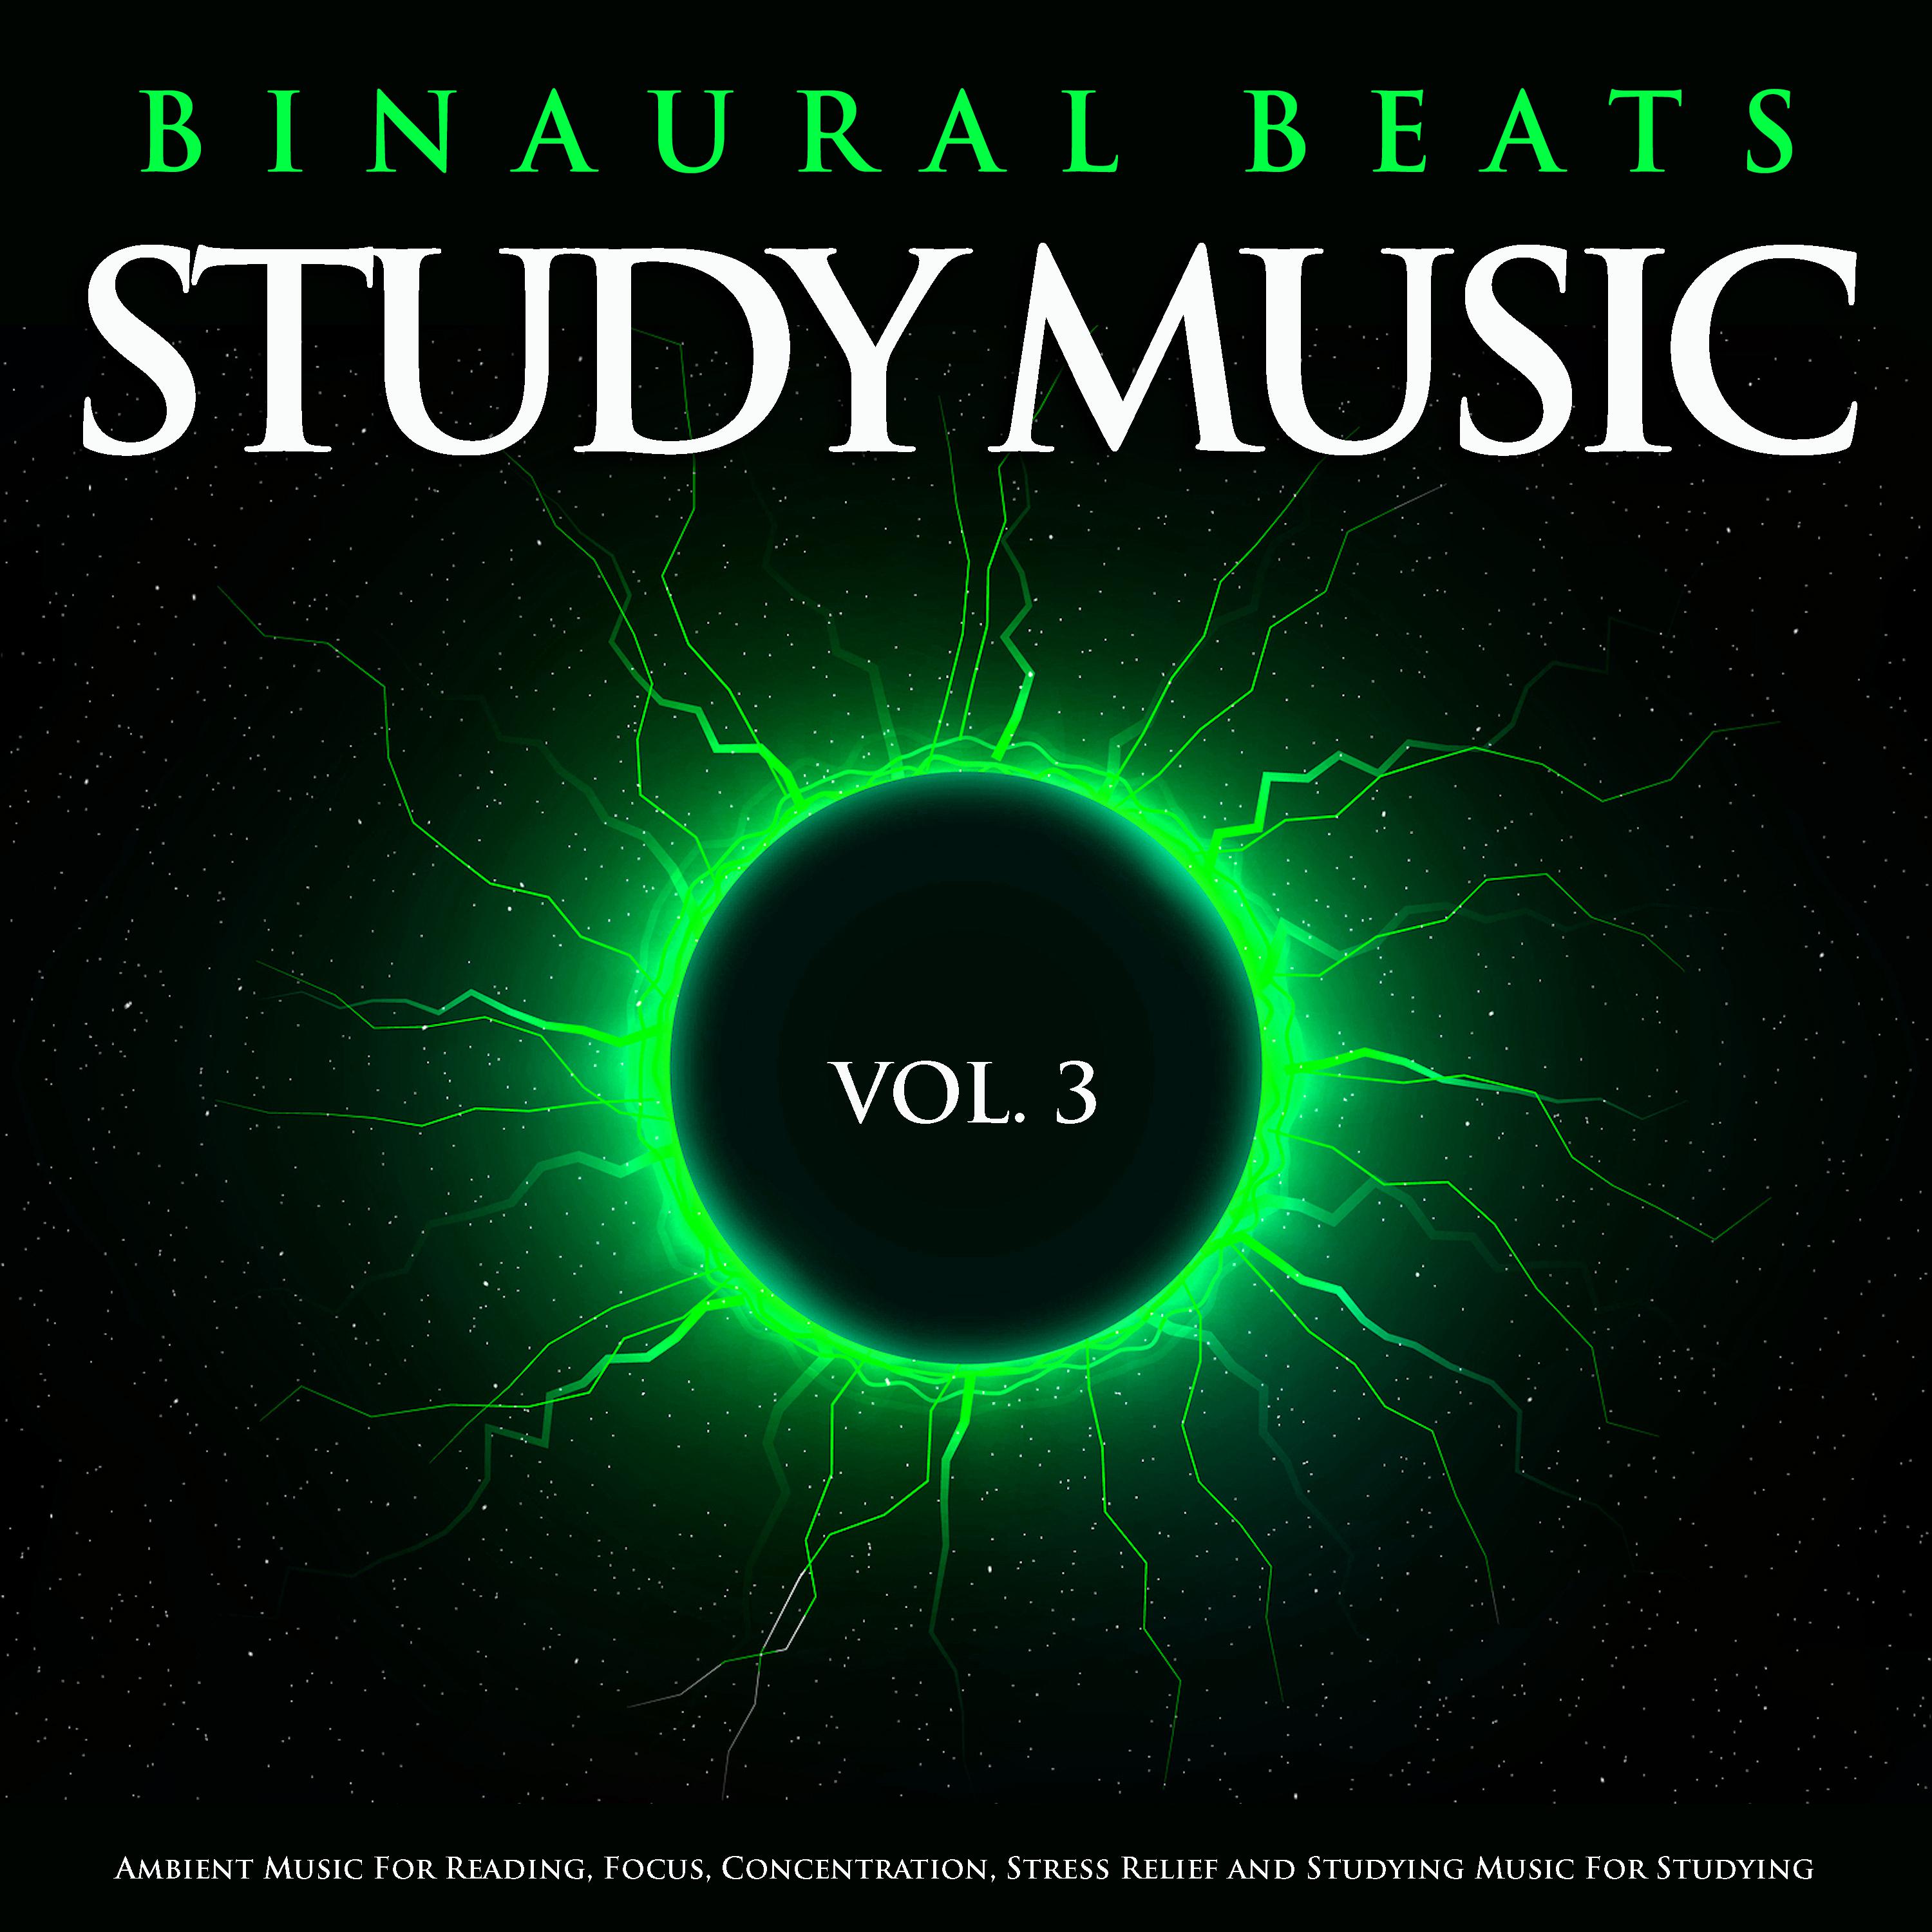 Binaural Beats and Ambient Music For Studying